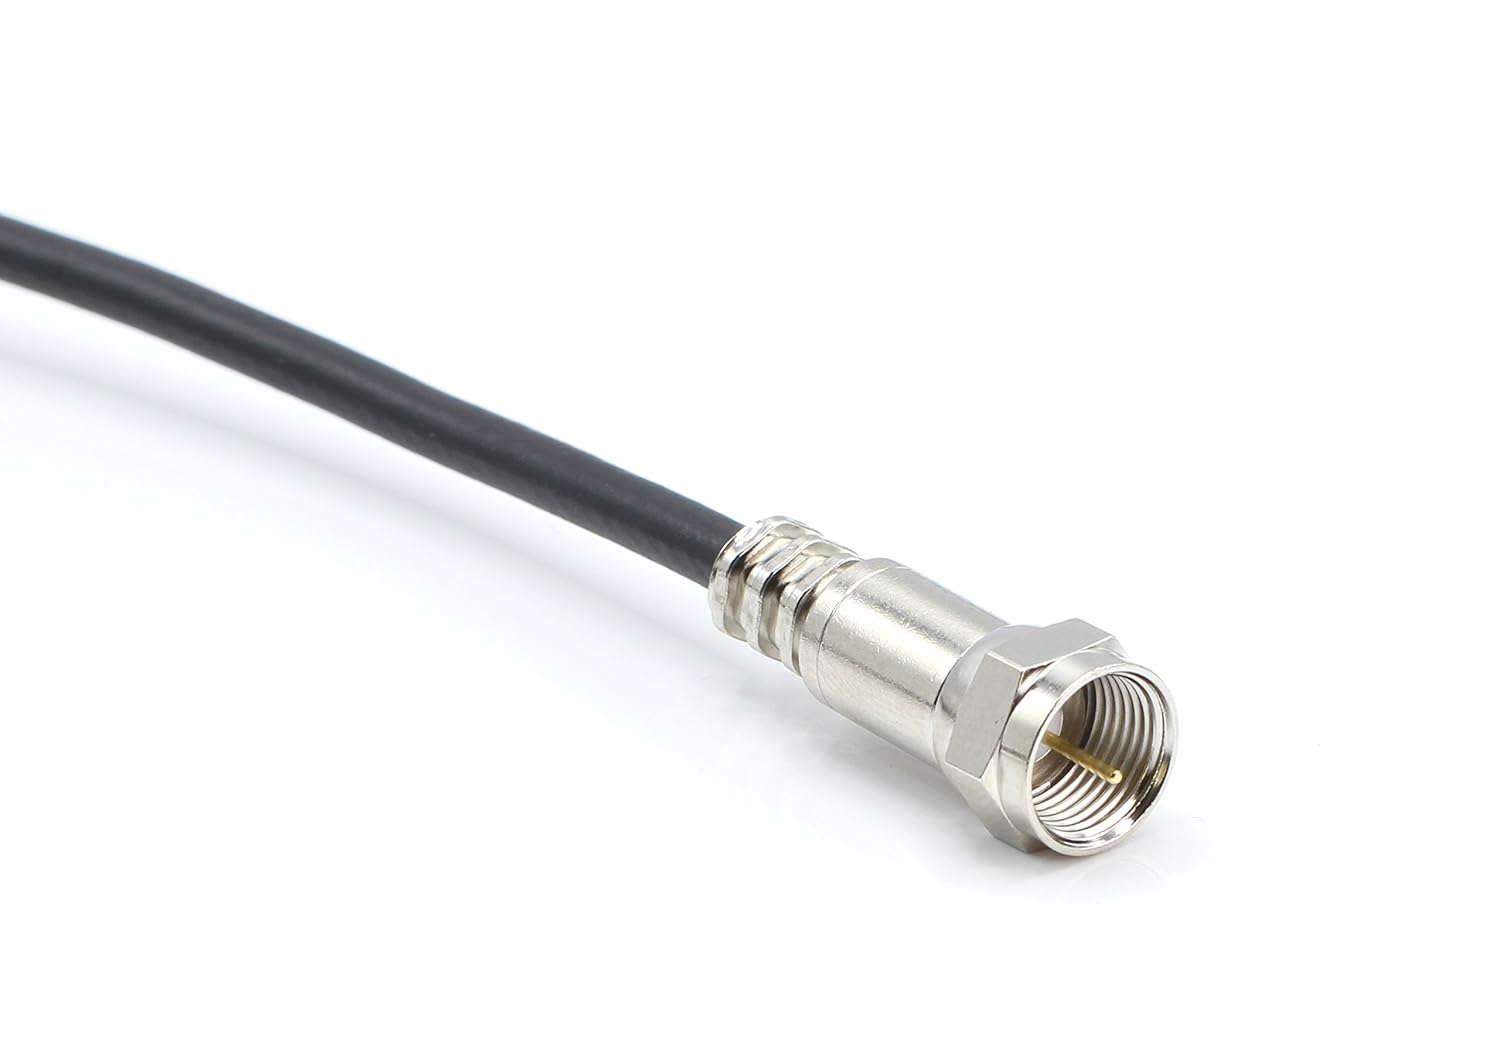 The Cimple Co Thin Coax Cable | Black RG58 Coaxial Cable for DirecTV, Satellite, CATV – 6 Feet